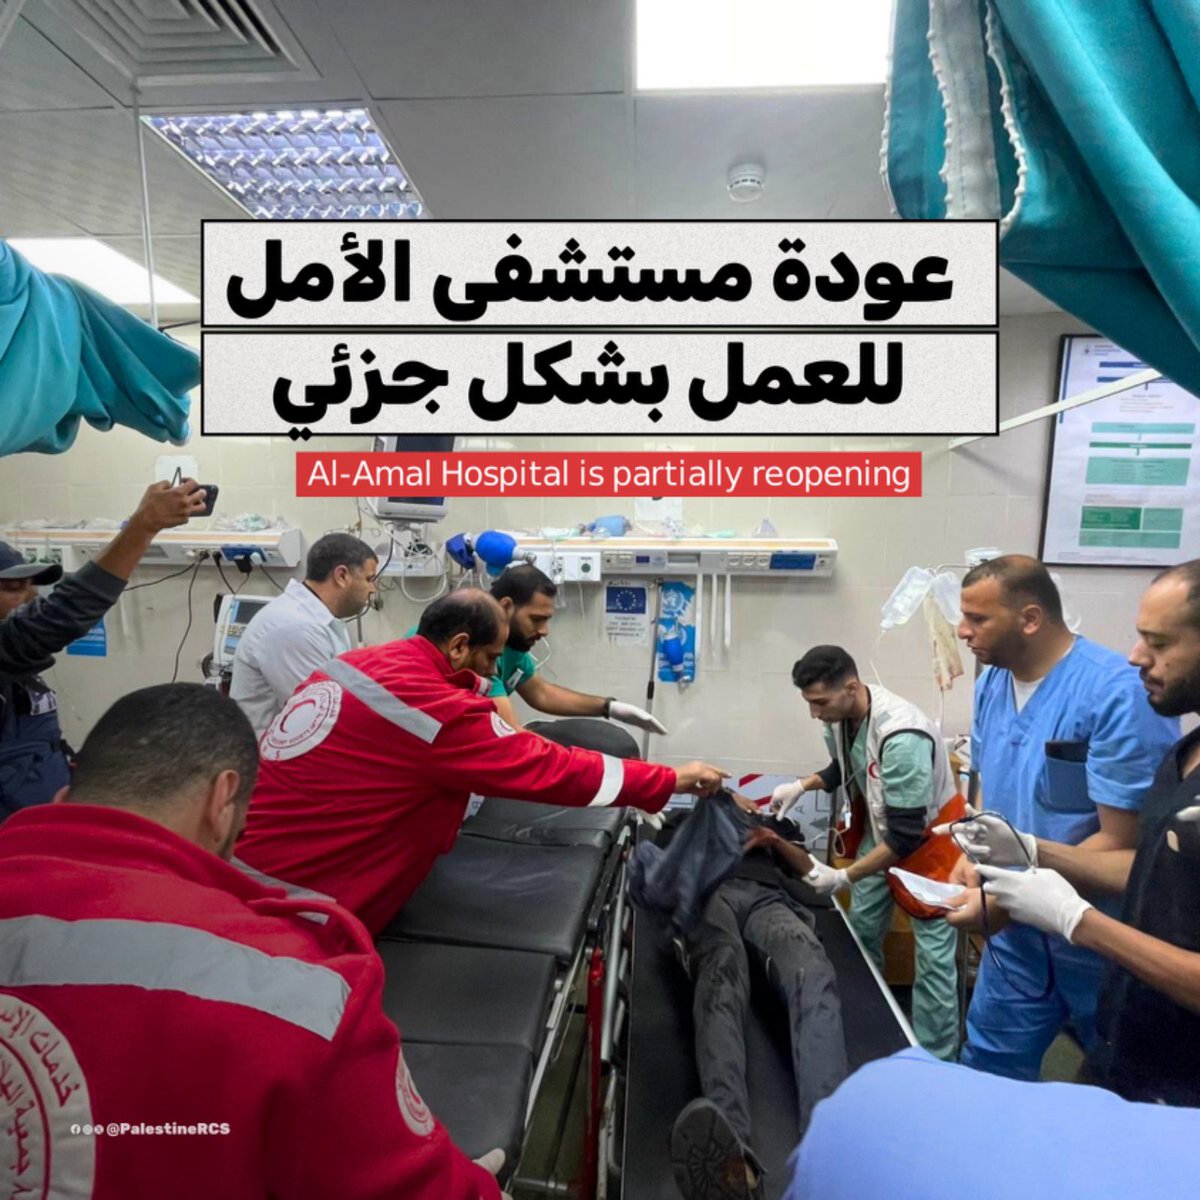 #AlAmalHospital in Khan Yunis is partially reopened, limited to the emergency department only, due to extensive damage inflicted by the Israeli occupation forces, making the operation of other departments impossible.
#NotATarget ❌ #Gaza